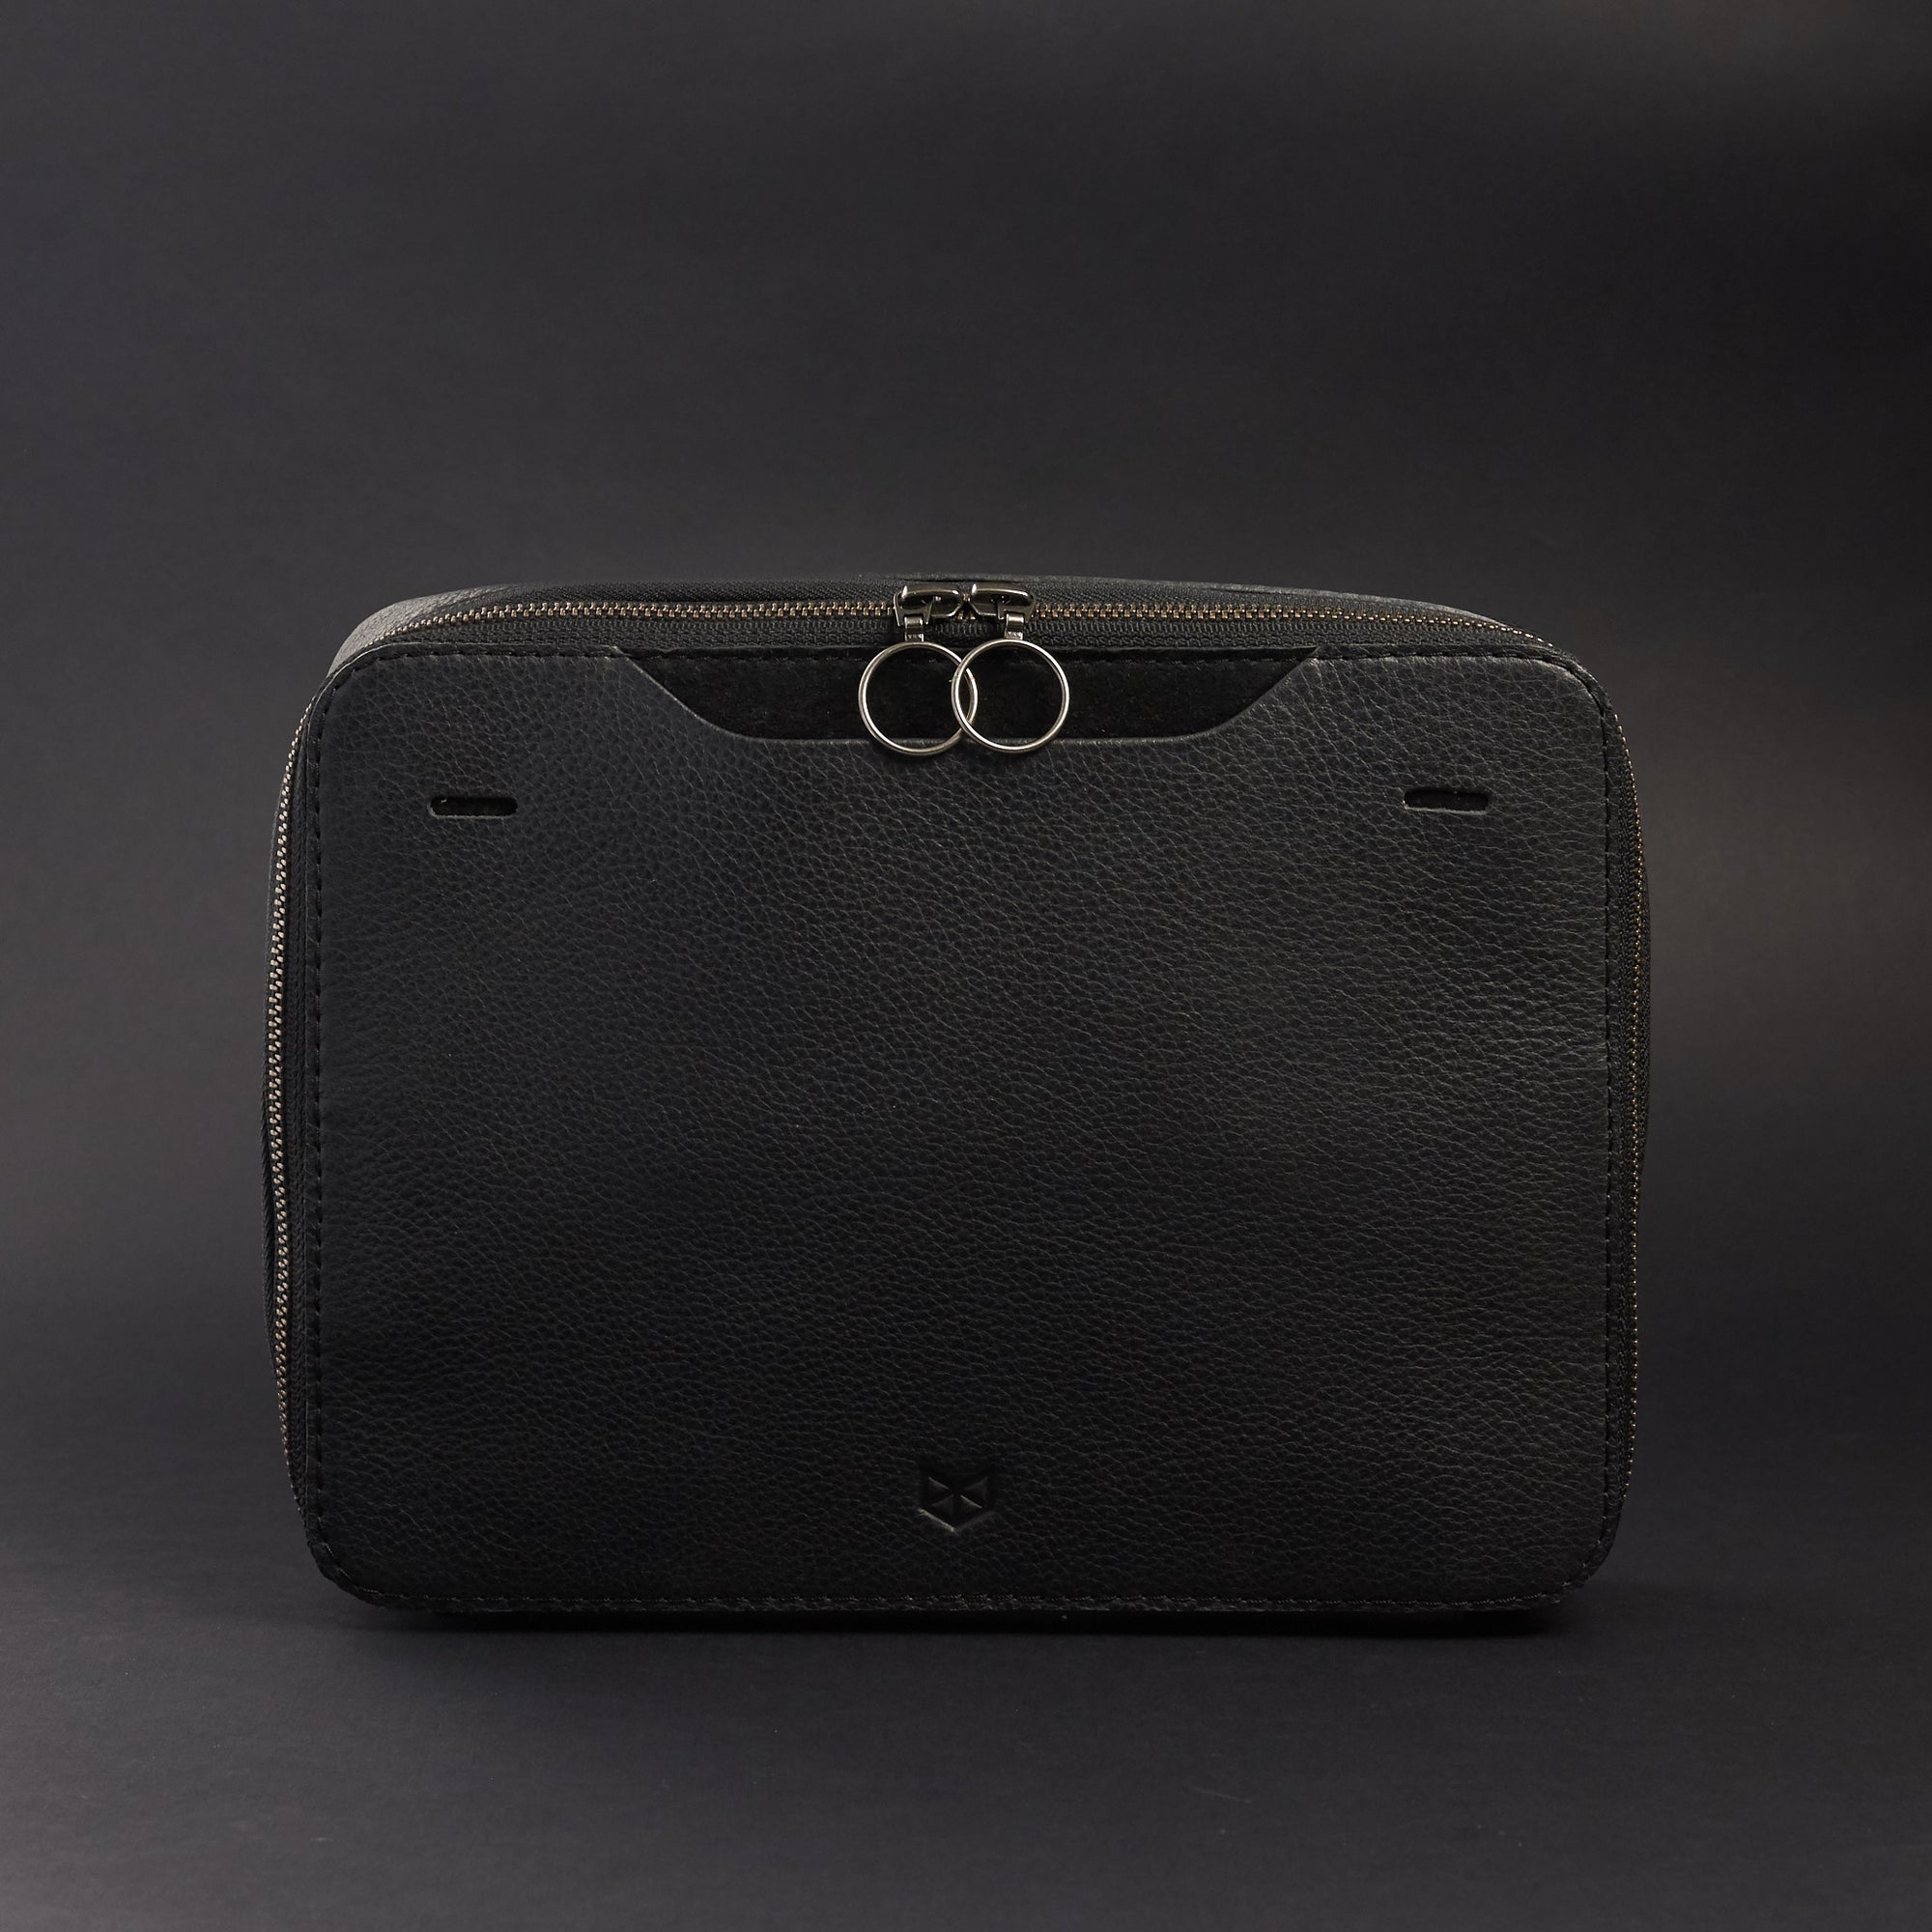 Leather organizer. Black tech pouch by Capra Leather